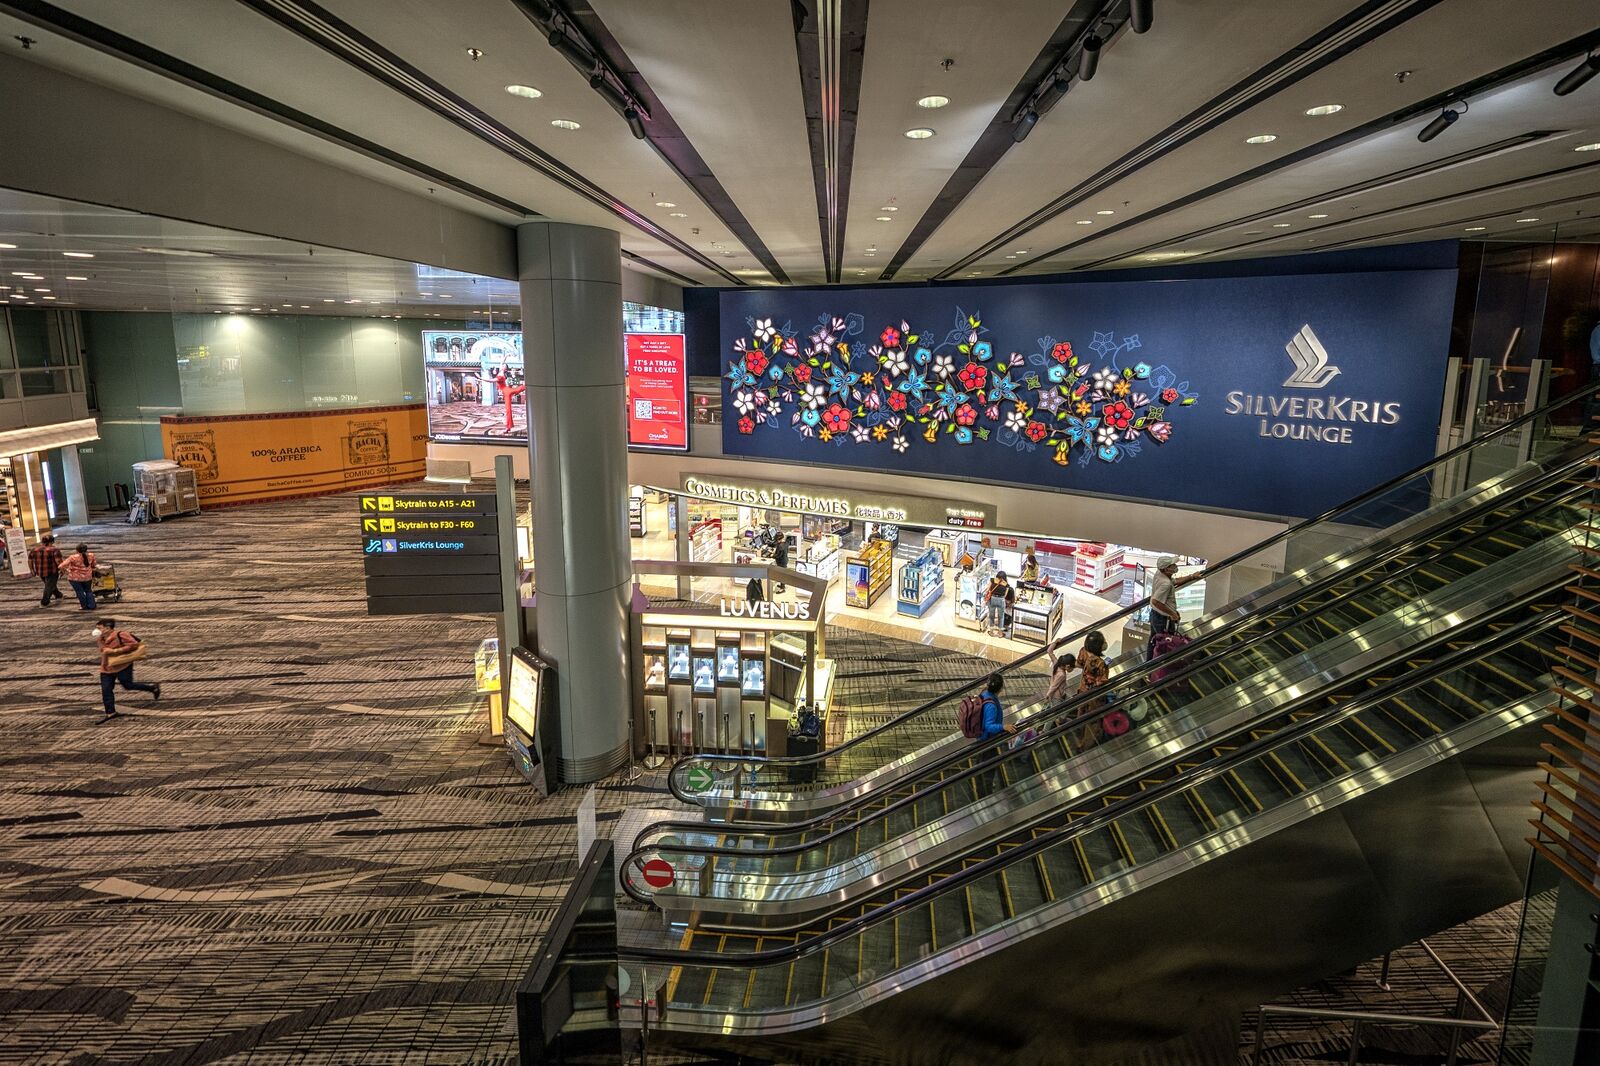 The entrance to the Singapore Airlines Ltd.’s SilverKris Lounges at Changi Airport last year. Changi was once again first in this year’s Skytrax World Airport Awards.